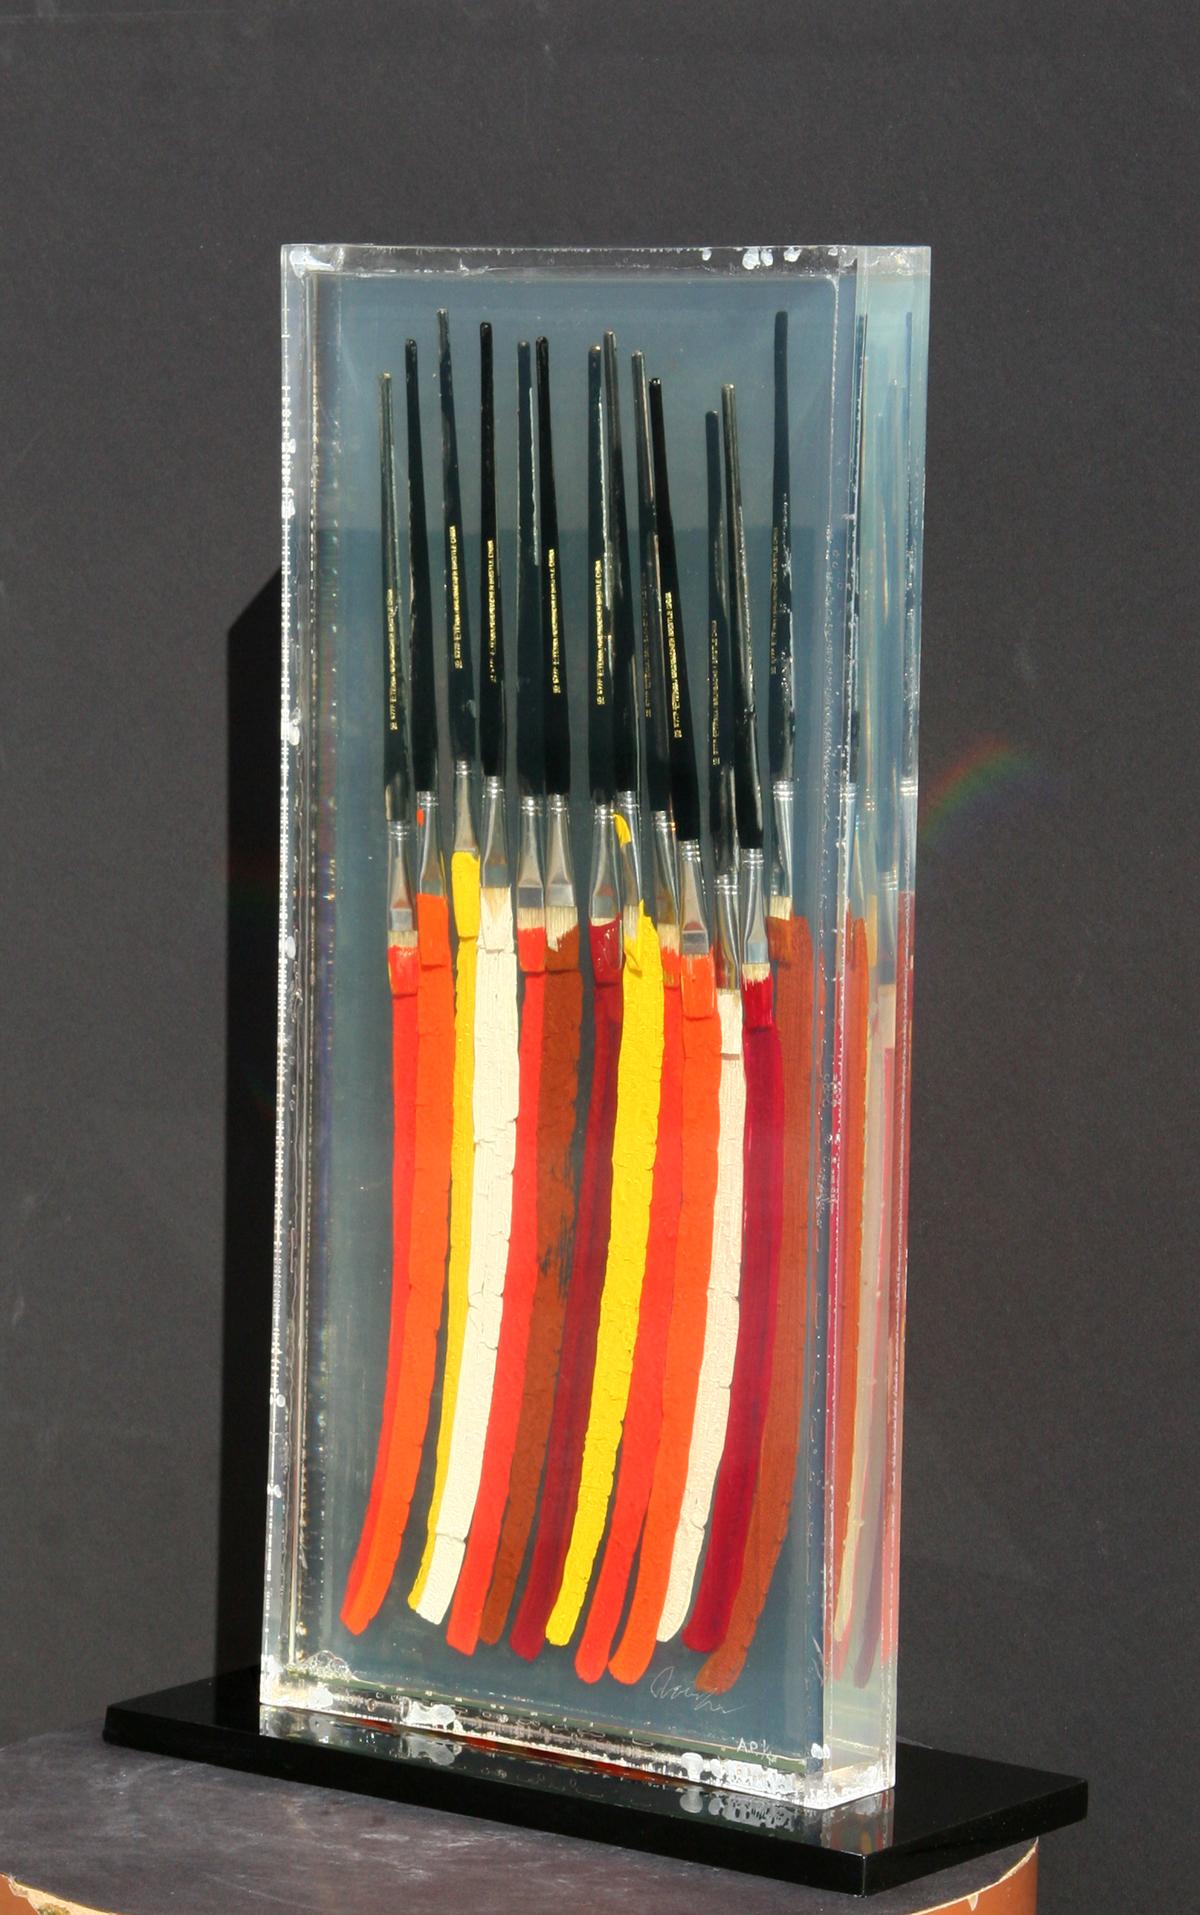 Paintbrushes II, Accumulation Sculpture by Arman For Sale 2